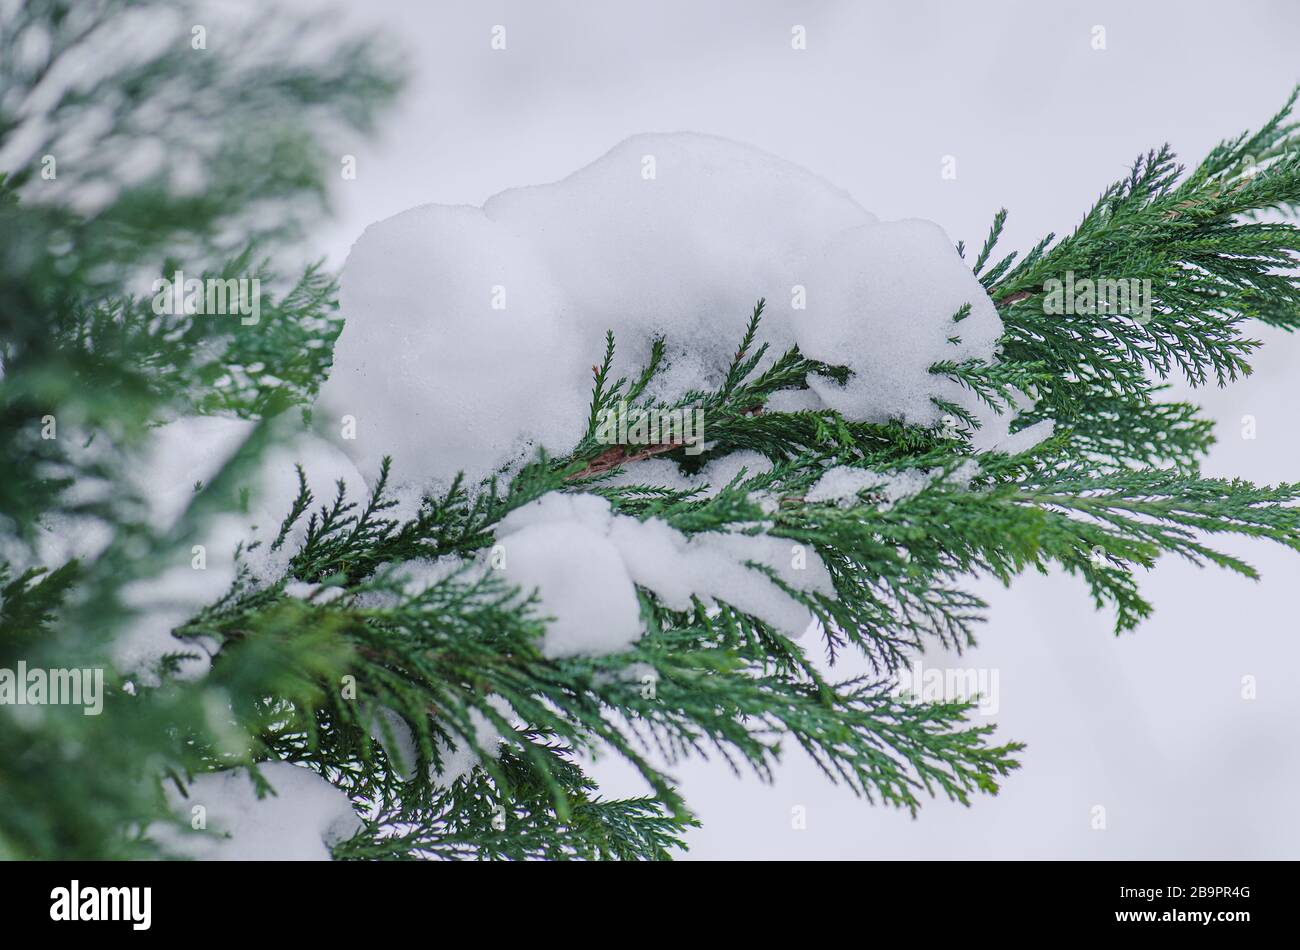 Conifer covered with snow in winter outdoor Stock Photo